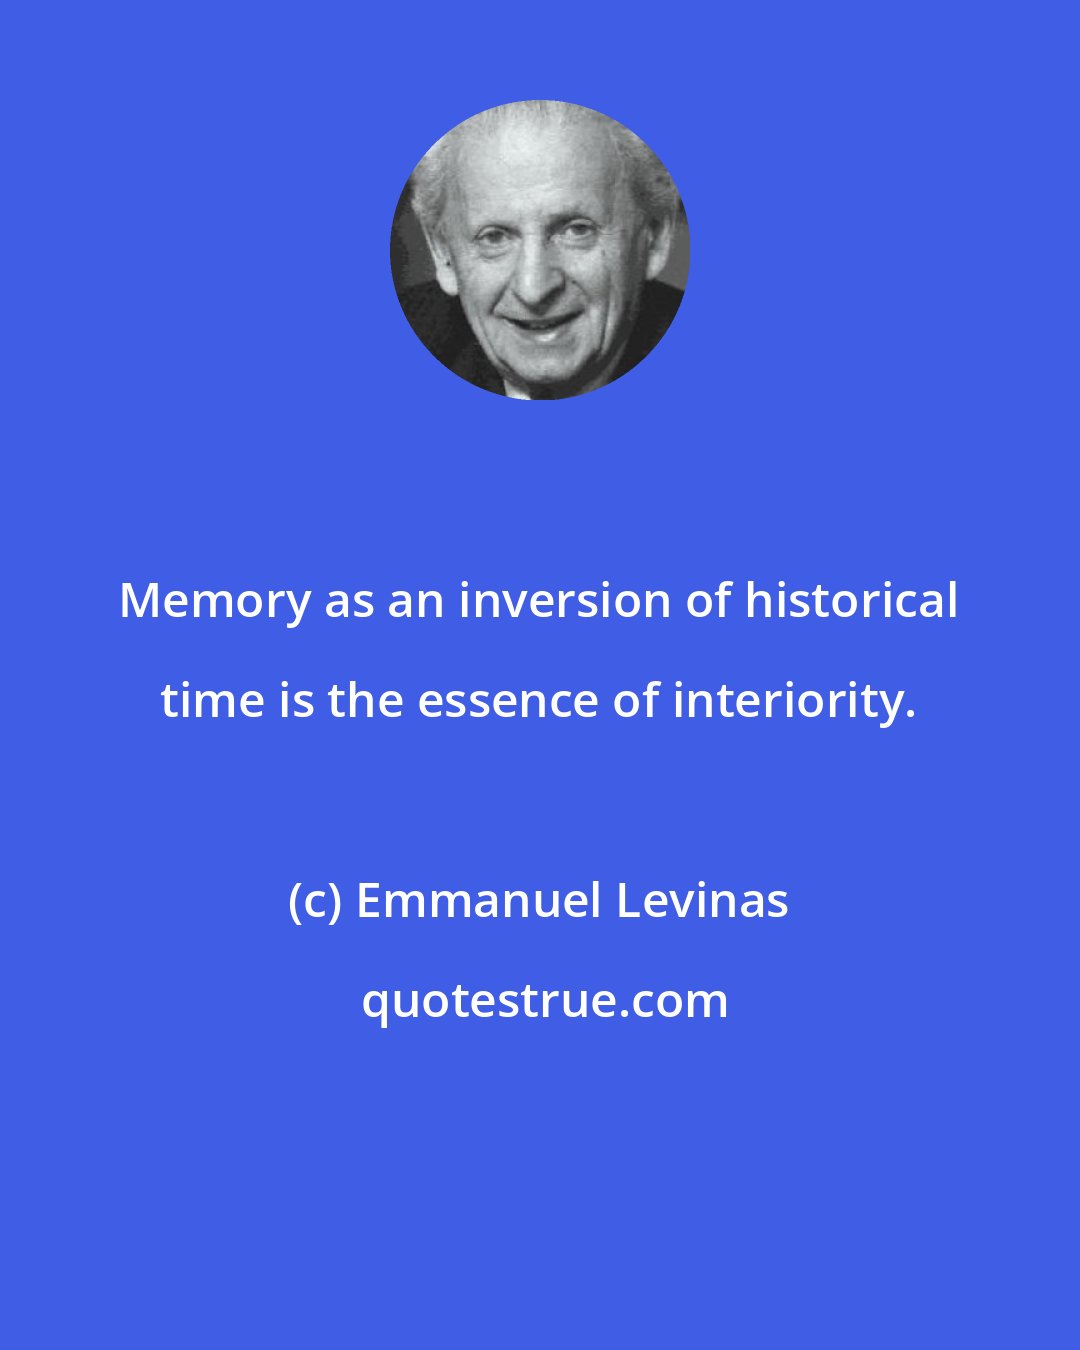 Emmanuel Levinas: Memory as an inversion of historical time is the essence of interiority.